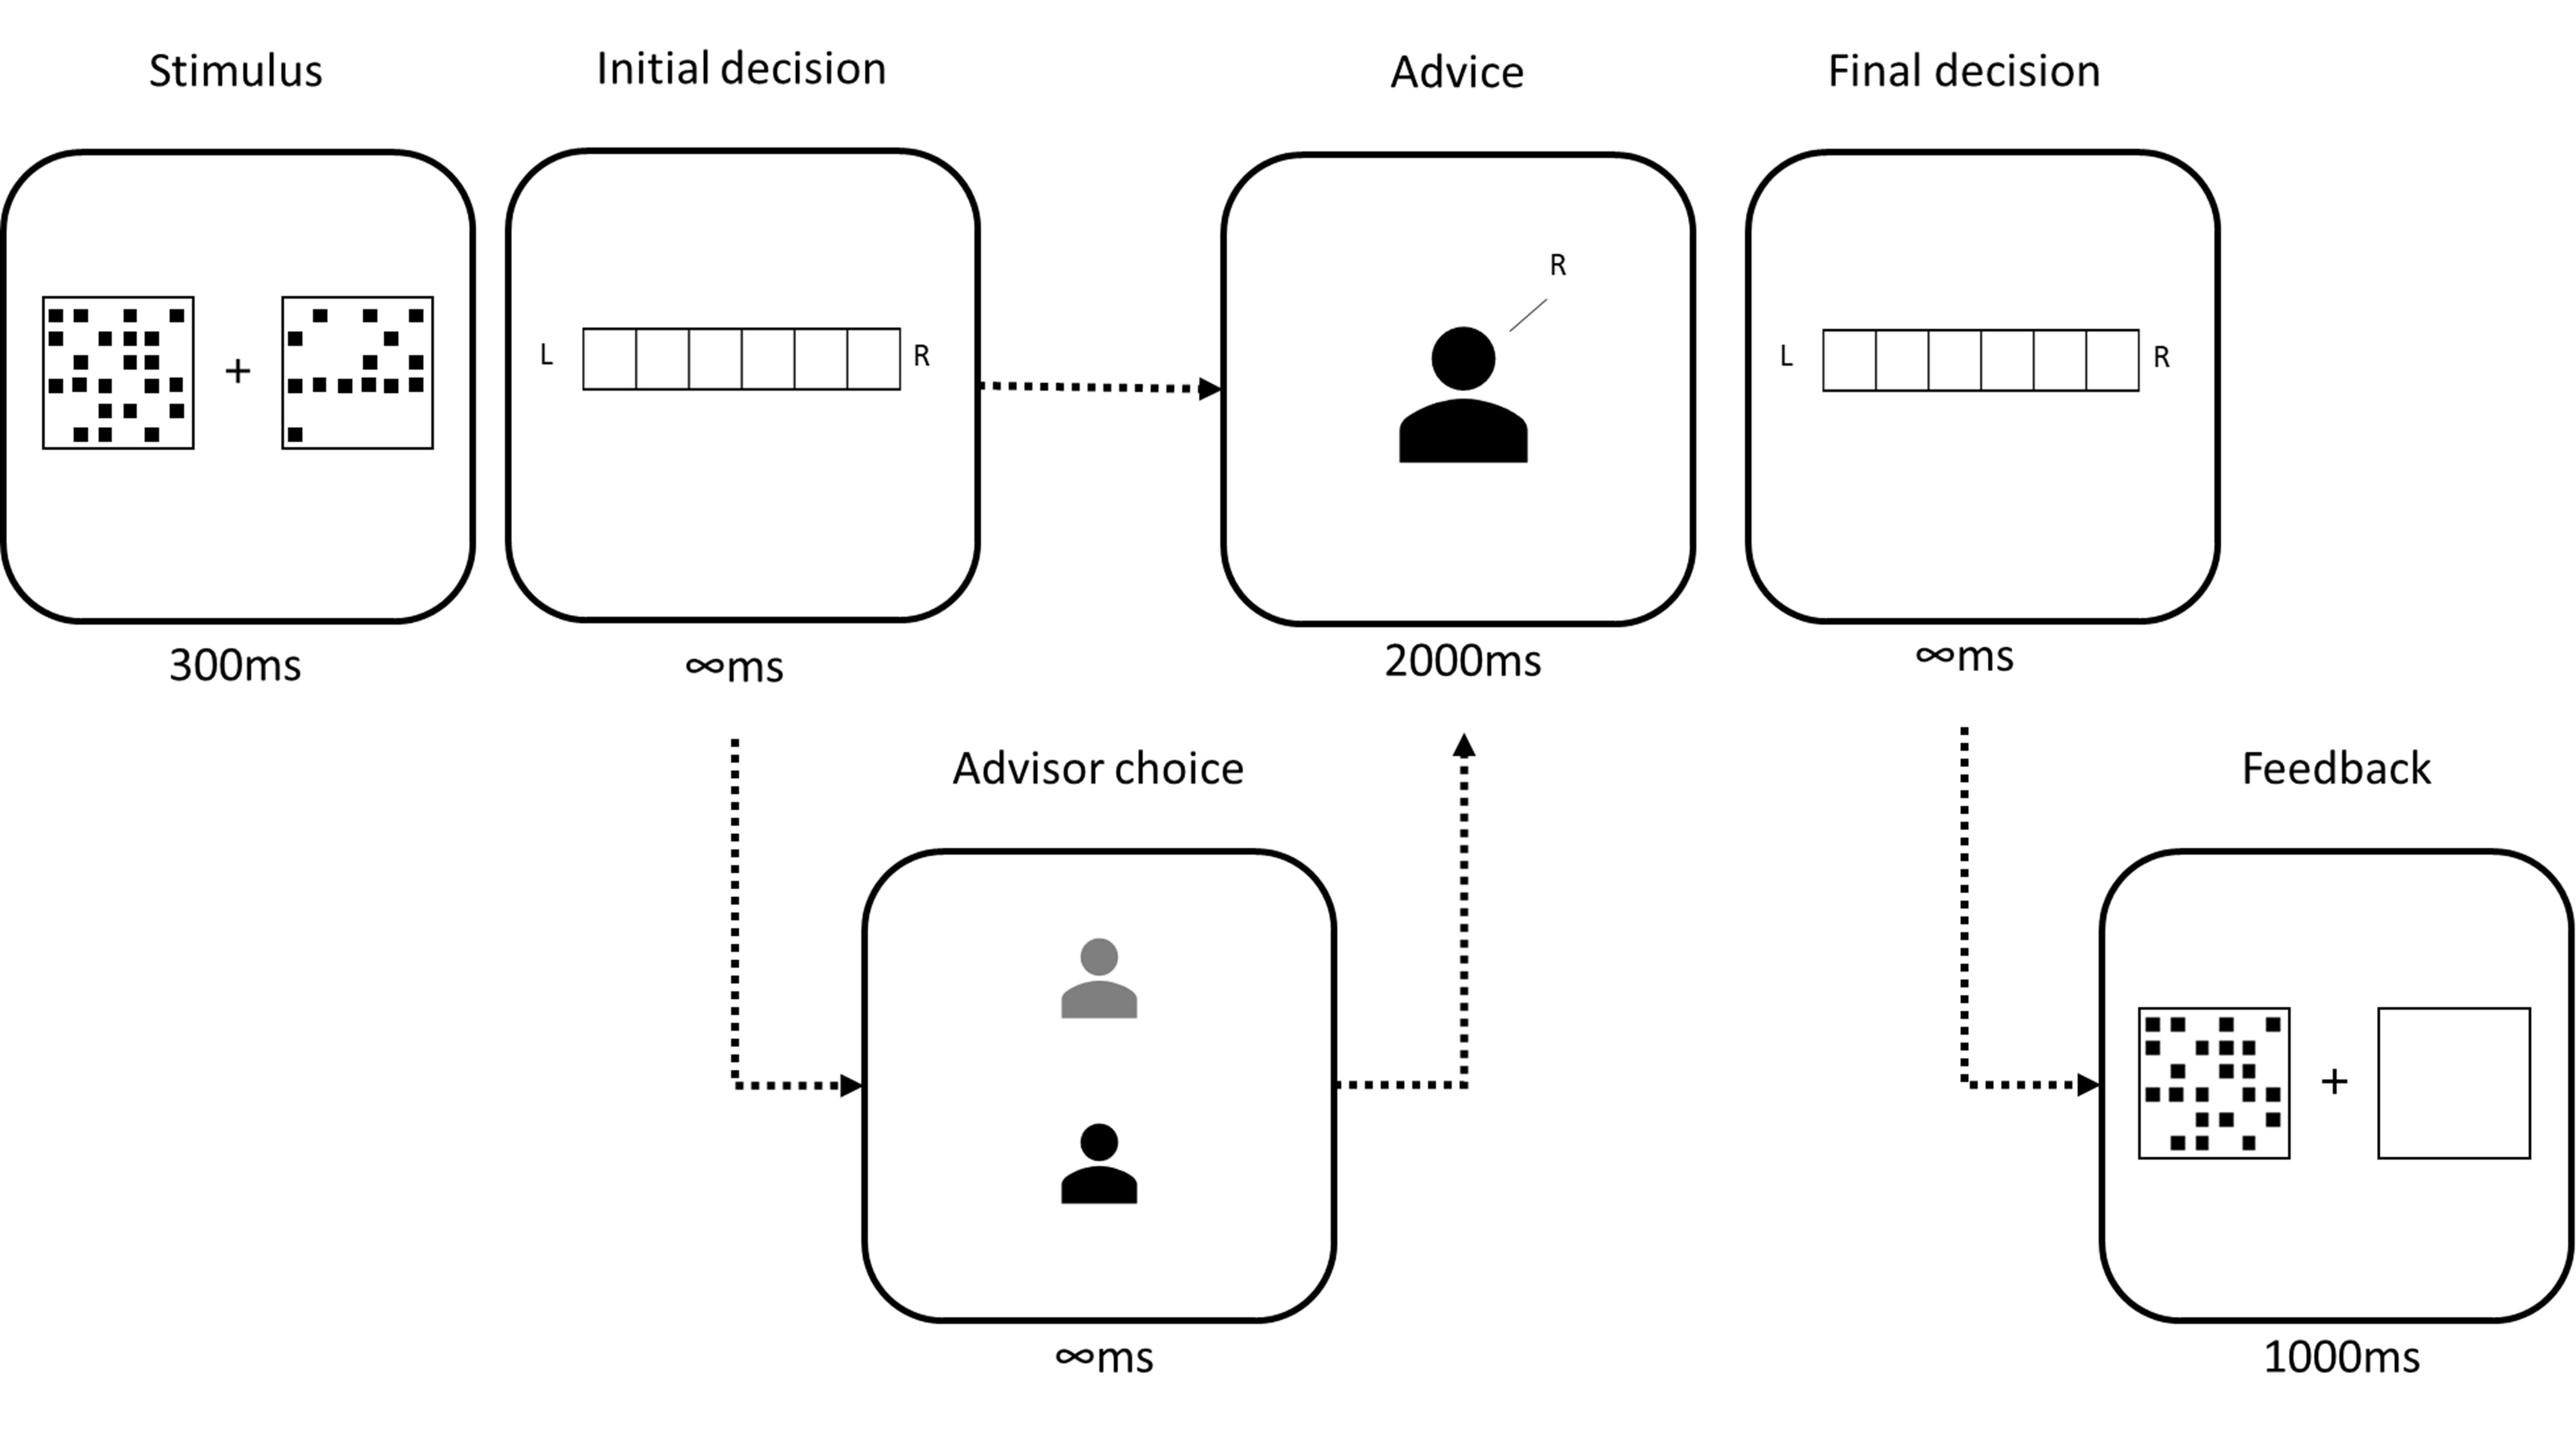 Trial structure of the Dots task.<br/> In the initial estimate phase, participants saw two boxes of dots presented simultaneously for 300ms. Participants then reported whether there were more dots on in the left or the right box, and how confident they were in this decision. Participants then received advice, sometimes being offered the choice of which advisor would provide the advice. The advice was displayed for 2000ms before participants could submit a final decision, again reporting which box they believe contained more dots and their confidence in their decision. On feedback trials, feedback was presented by redisplaying the correct box while showing the other box as empty.